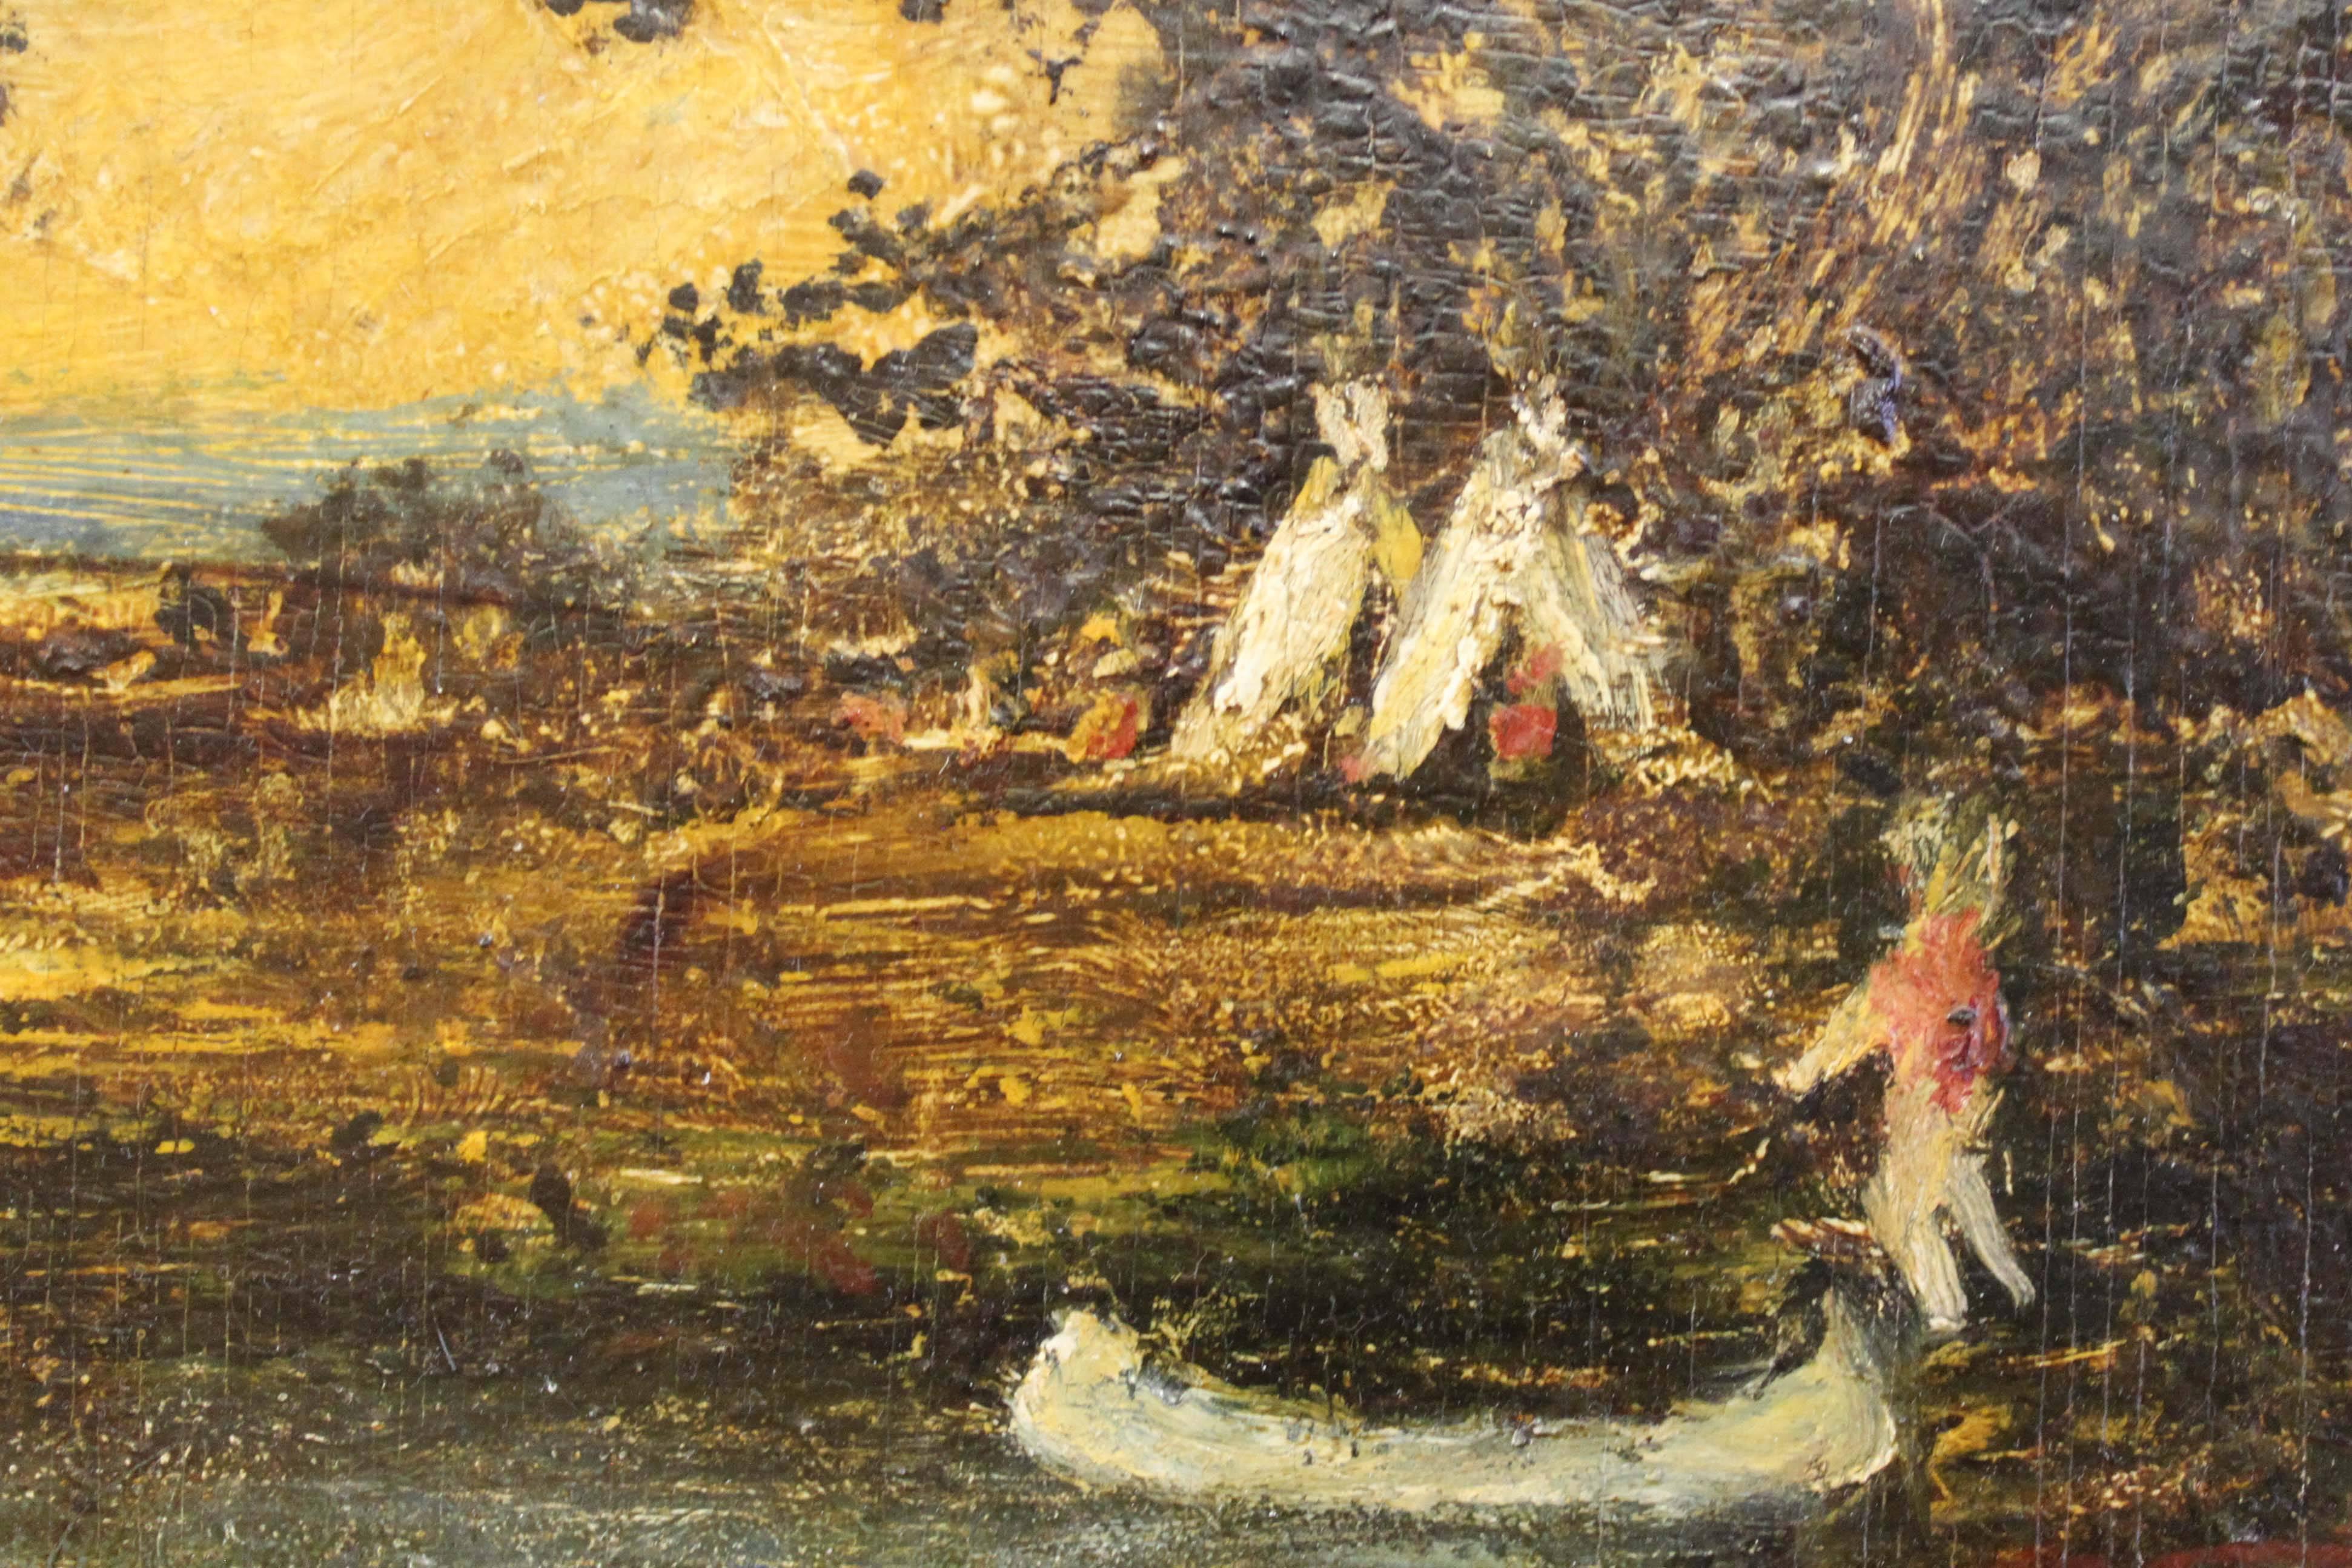 ‘Indian Encampment’ attributed to Ralph Albert Blakelock (1847-1919). An oil painting on plywood of one of his favourite subjects. His work can be found in the Metropolitan Museum in N.Y.C. and the Whitney Museum of American Art. Likely the original